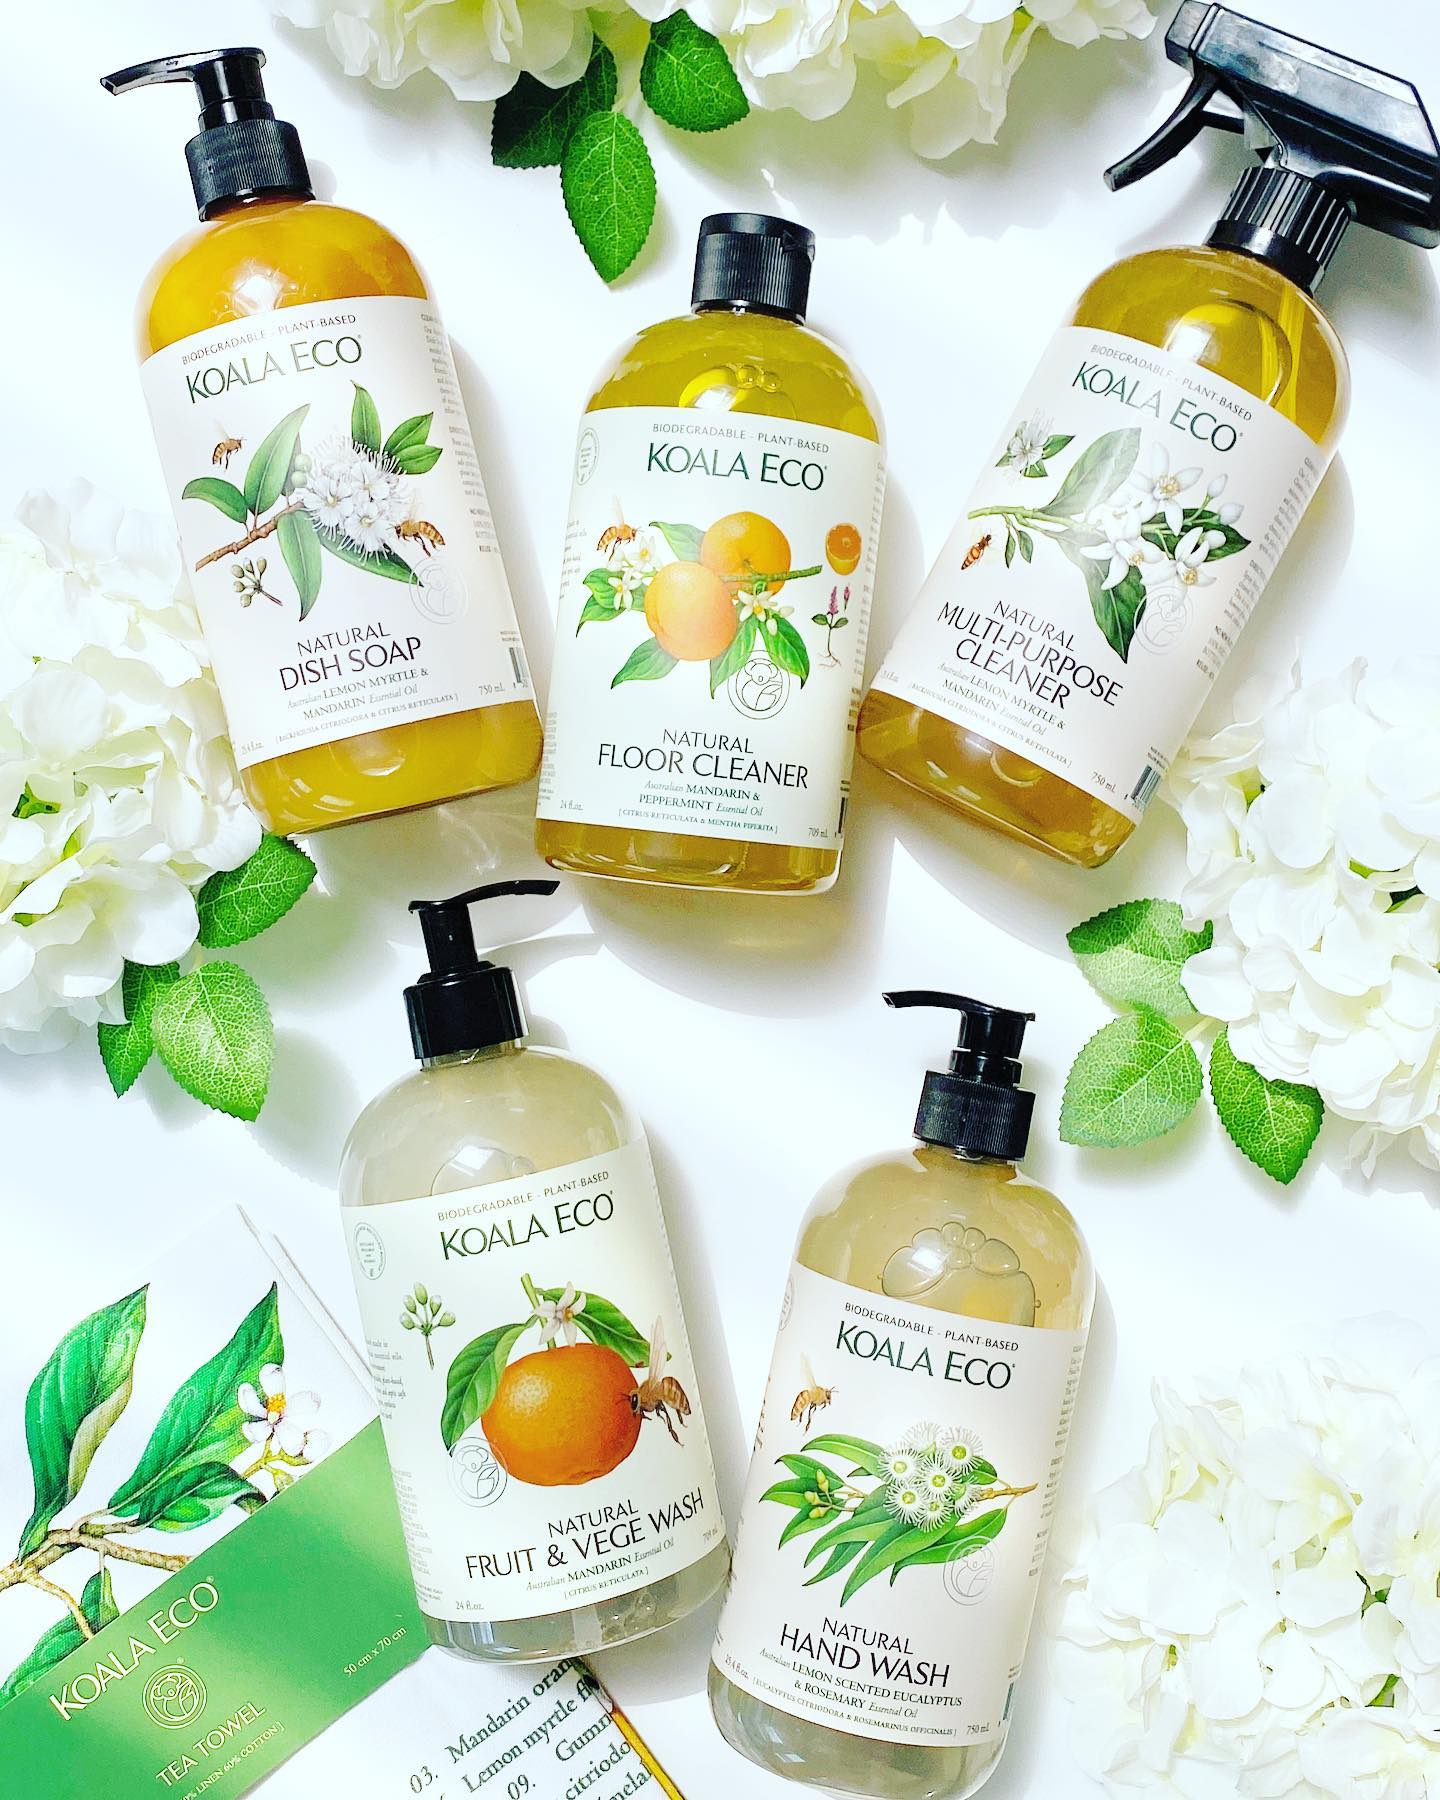 Koala Eco organic cleaning product reviews and promo code